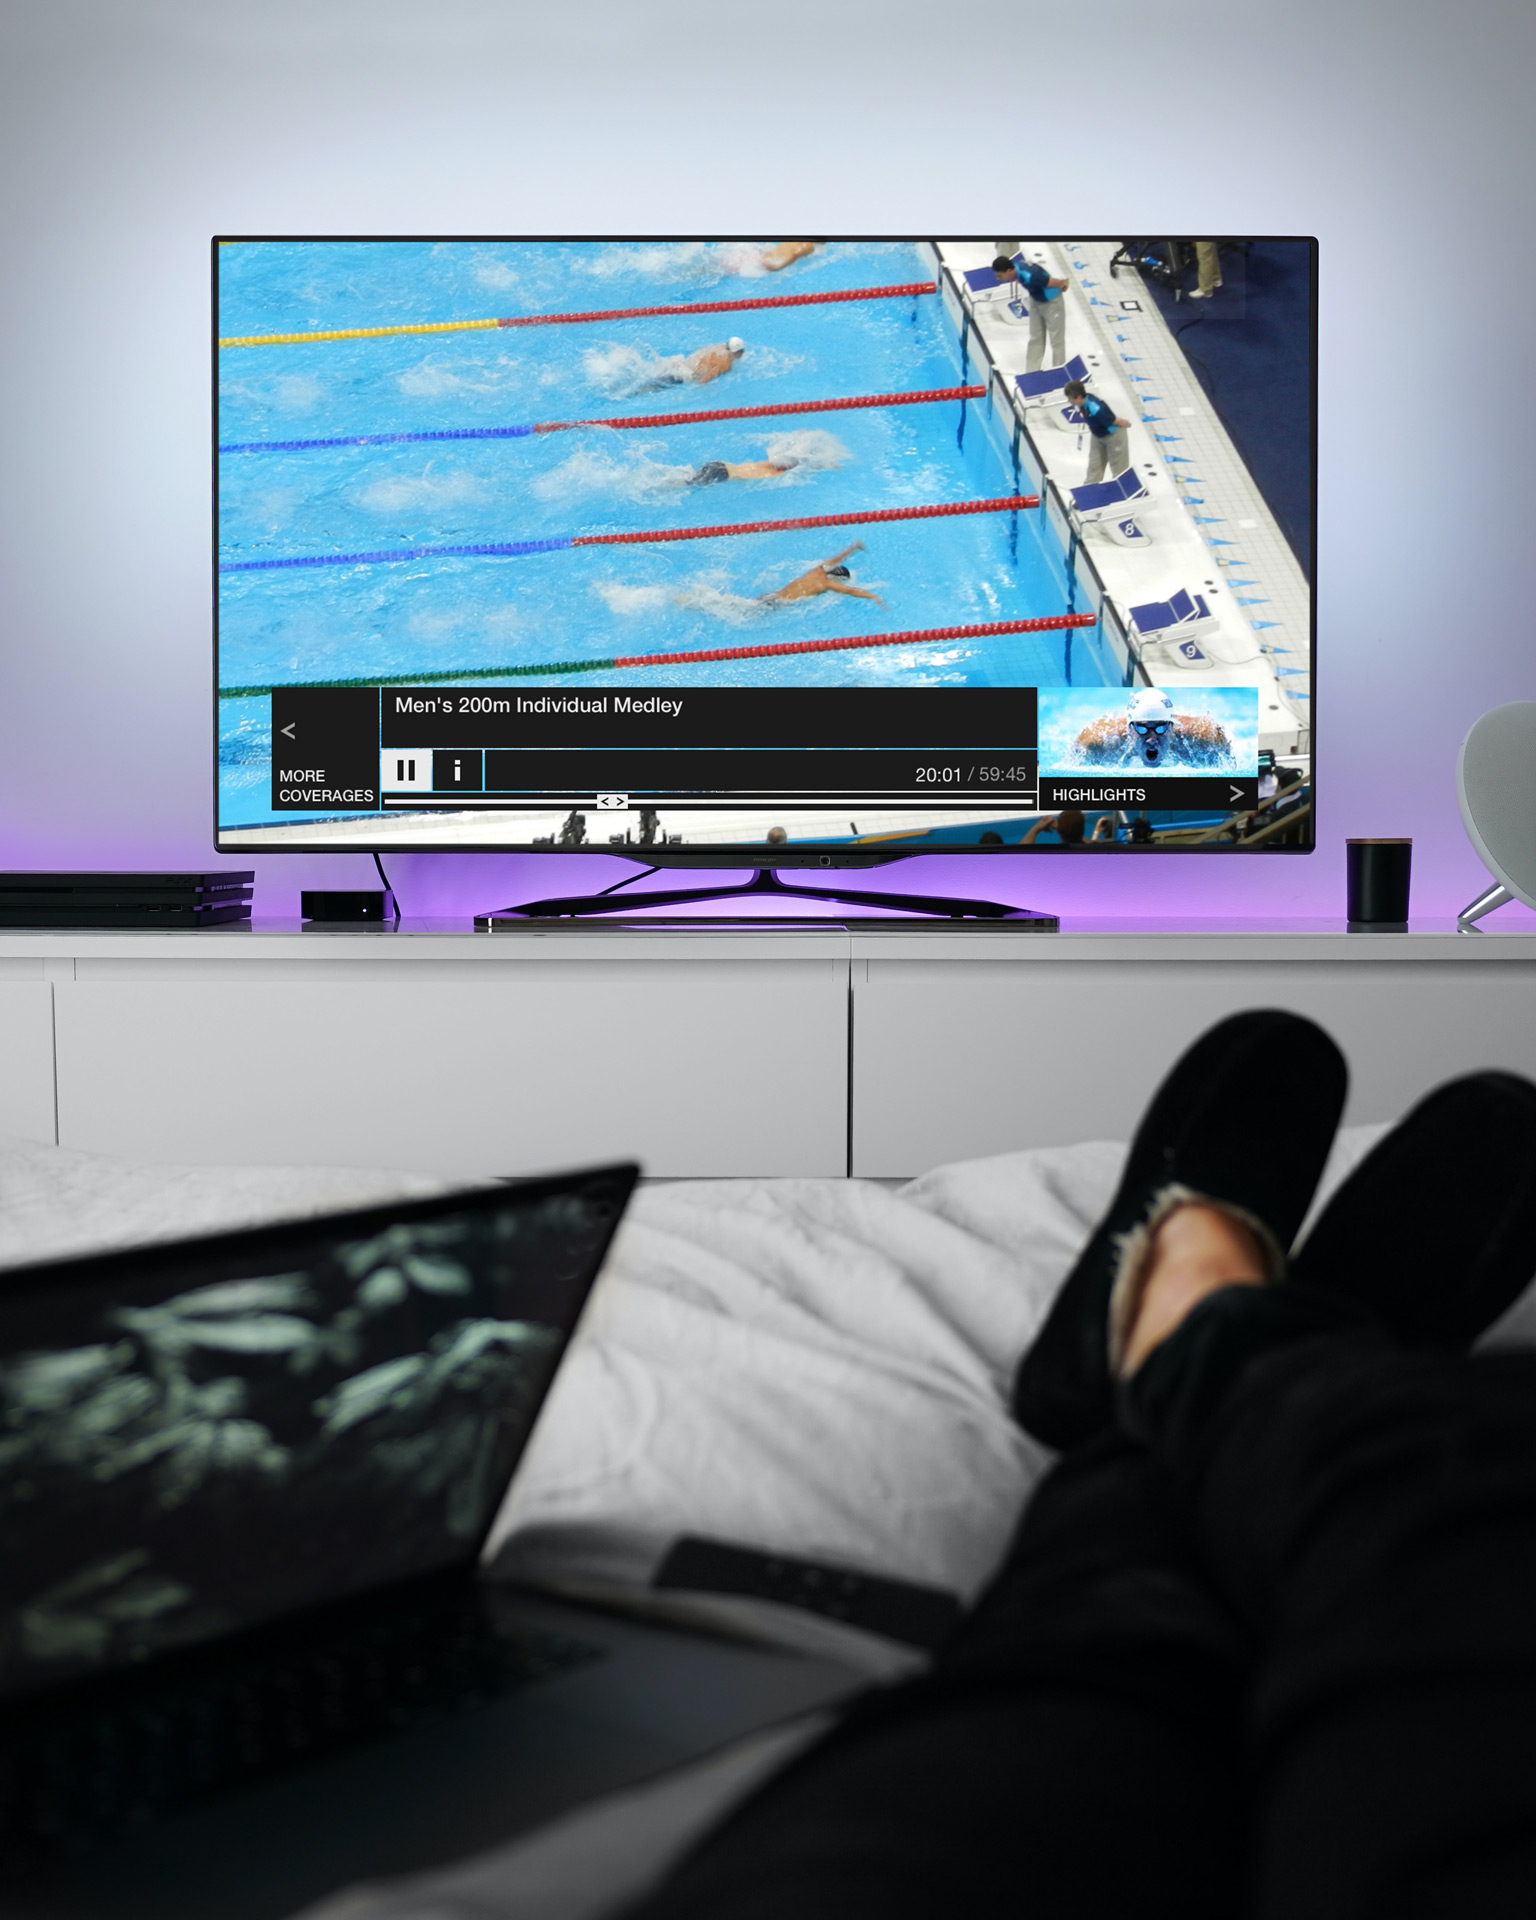 In a bedroom, there is a TV on a stand displaying a mockup of the Red Button+ live player featuring the Men's 200m Individual Medley. The coverage shows four swimmers in a pool. At the forefront of the image, a person's laptop and feet can be seen.